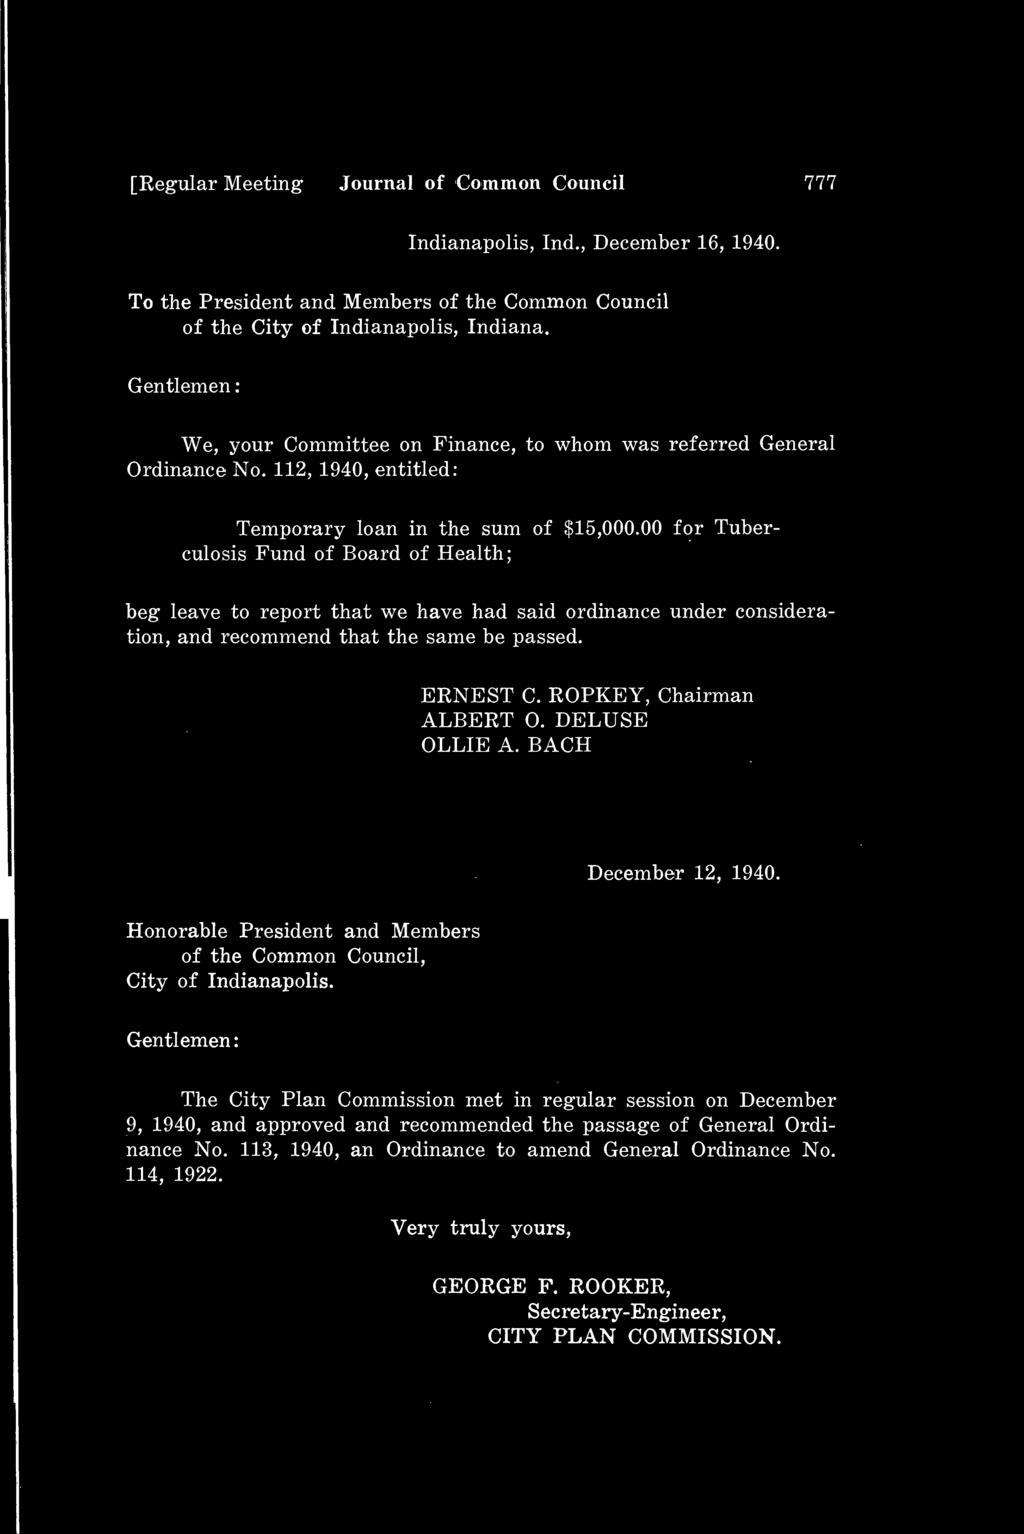 [Regular Meeting Journal of Common Council 777 Indianapolis, Ind., December 16, 1940. To the President and Members of the Common Council of the City of Indianapolis, Indiana.